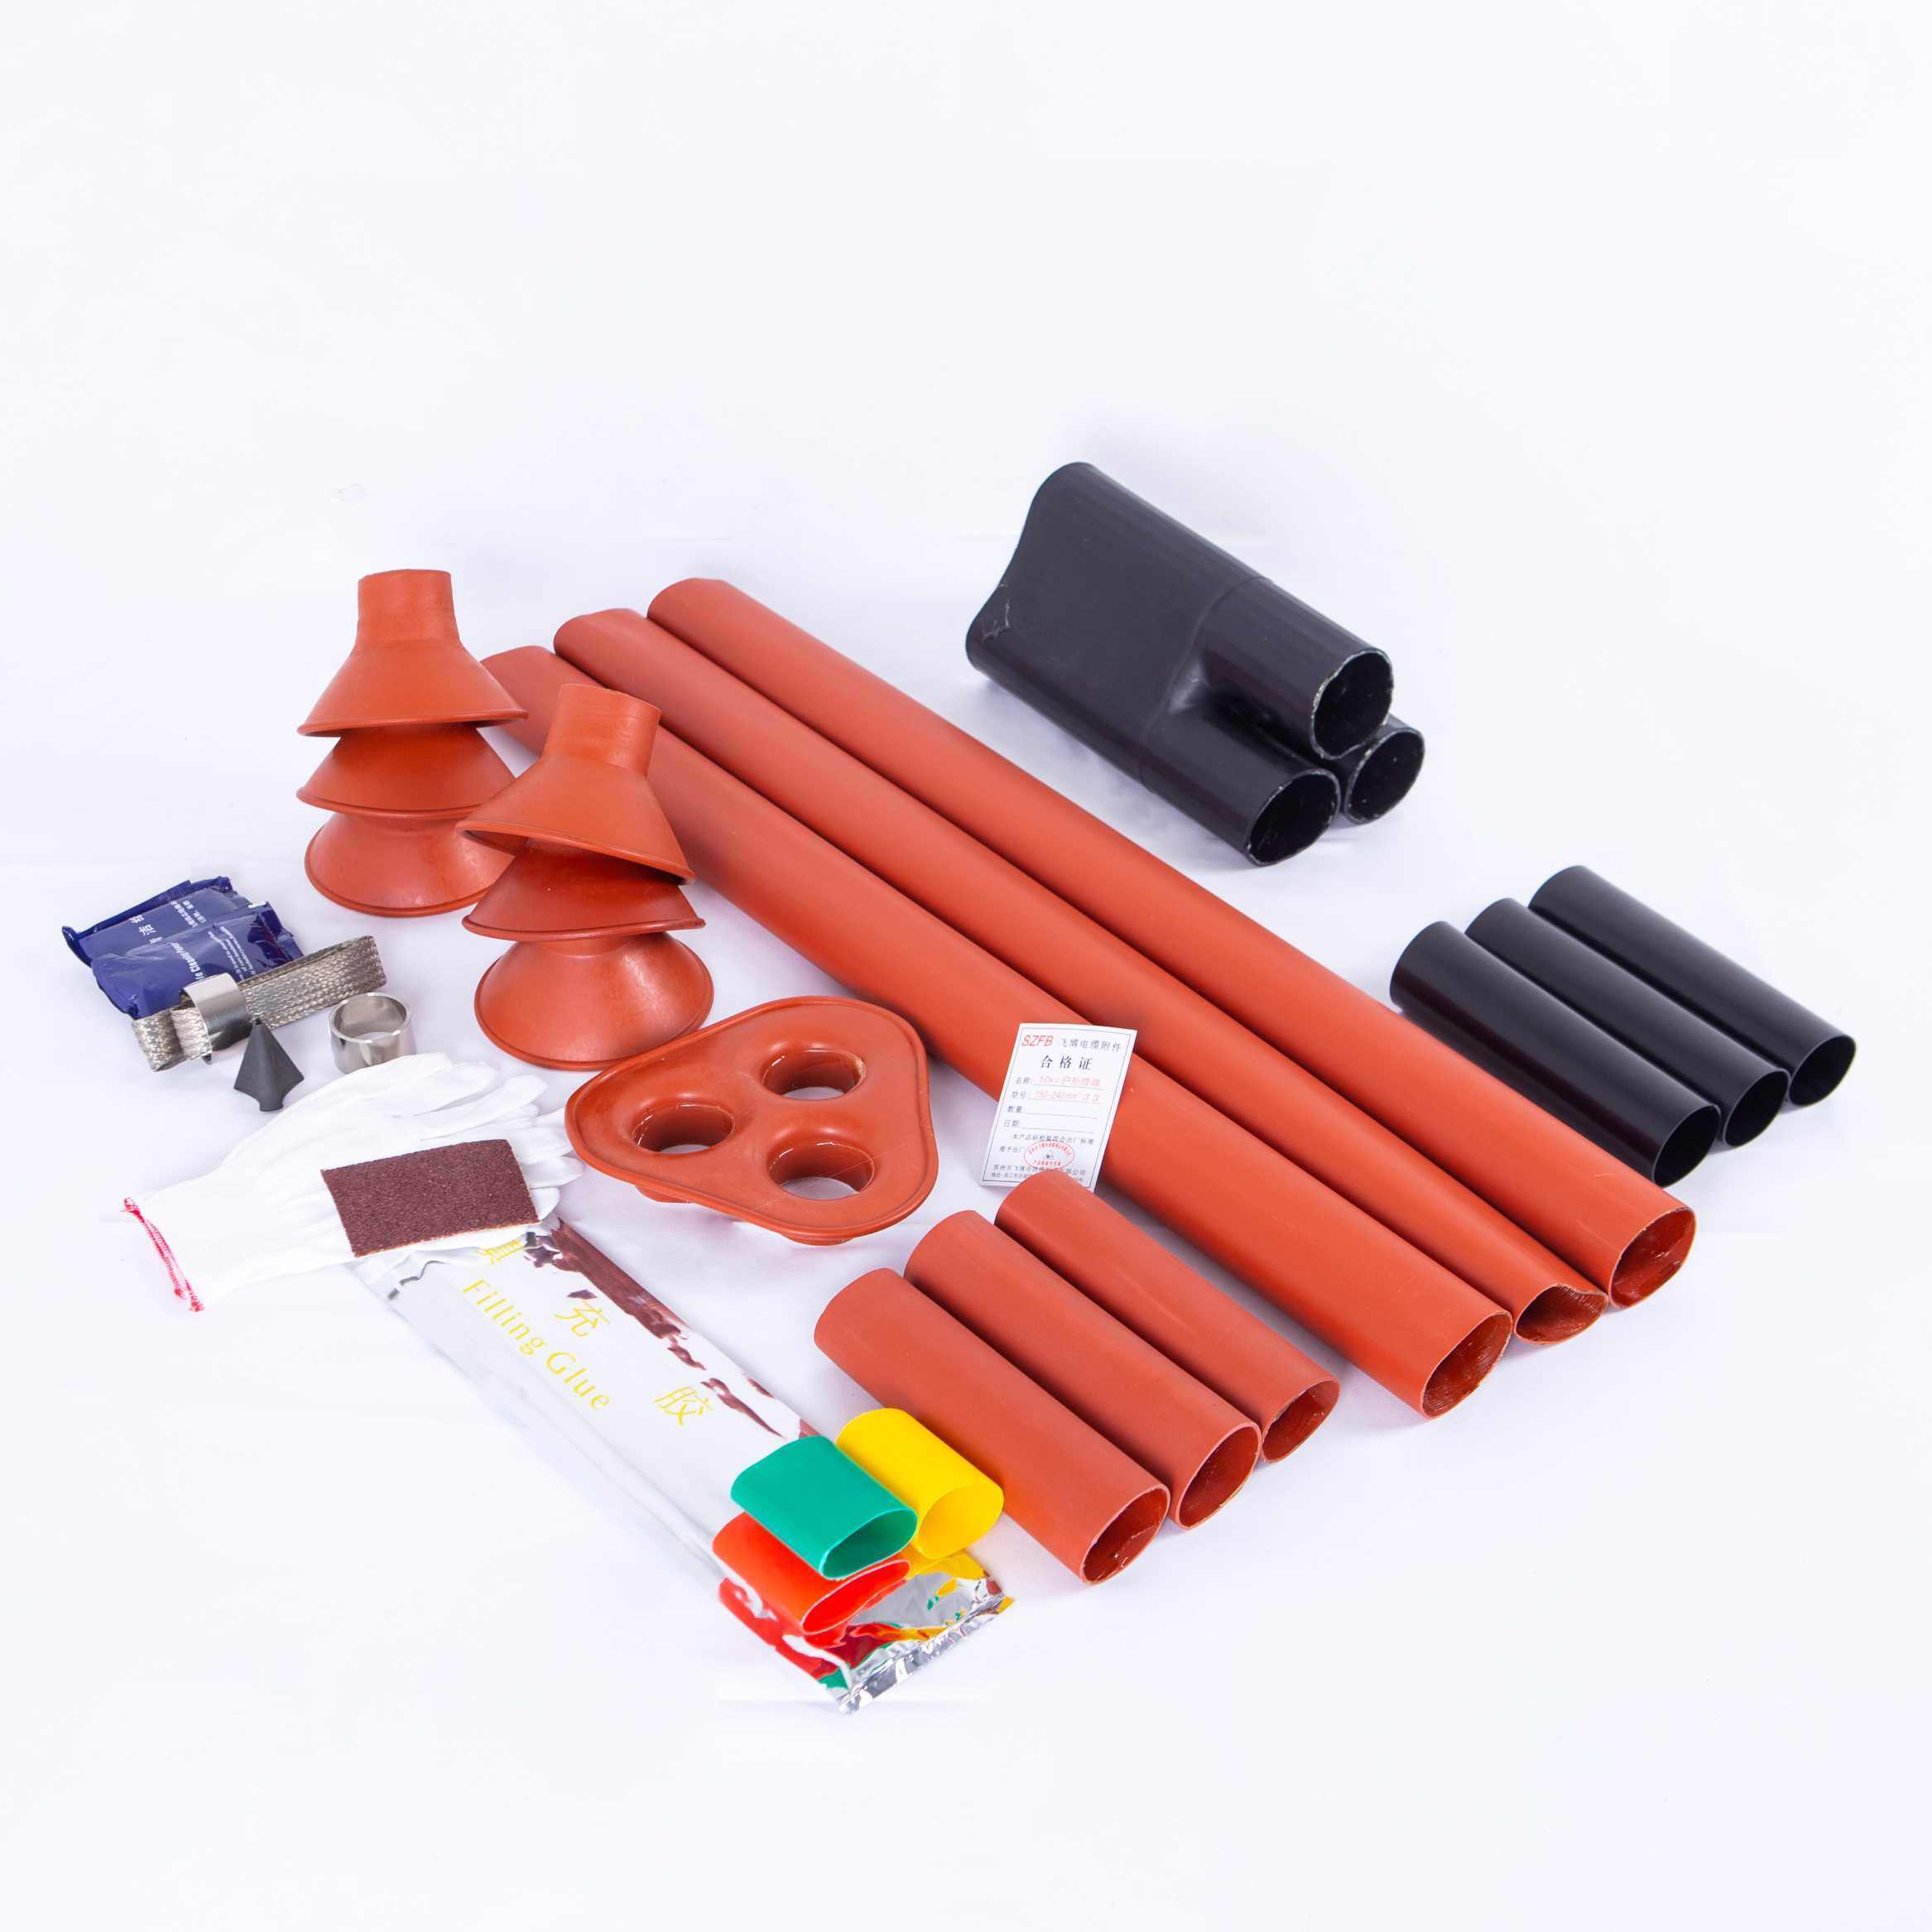 High Voltage Heat Shrinkable Cable, Thick Wall Adhesive Insulated Sleeve Raychem Standard Heat Shrink Cable Terminals Kit